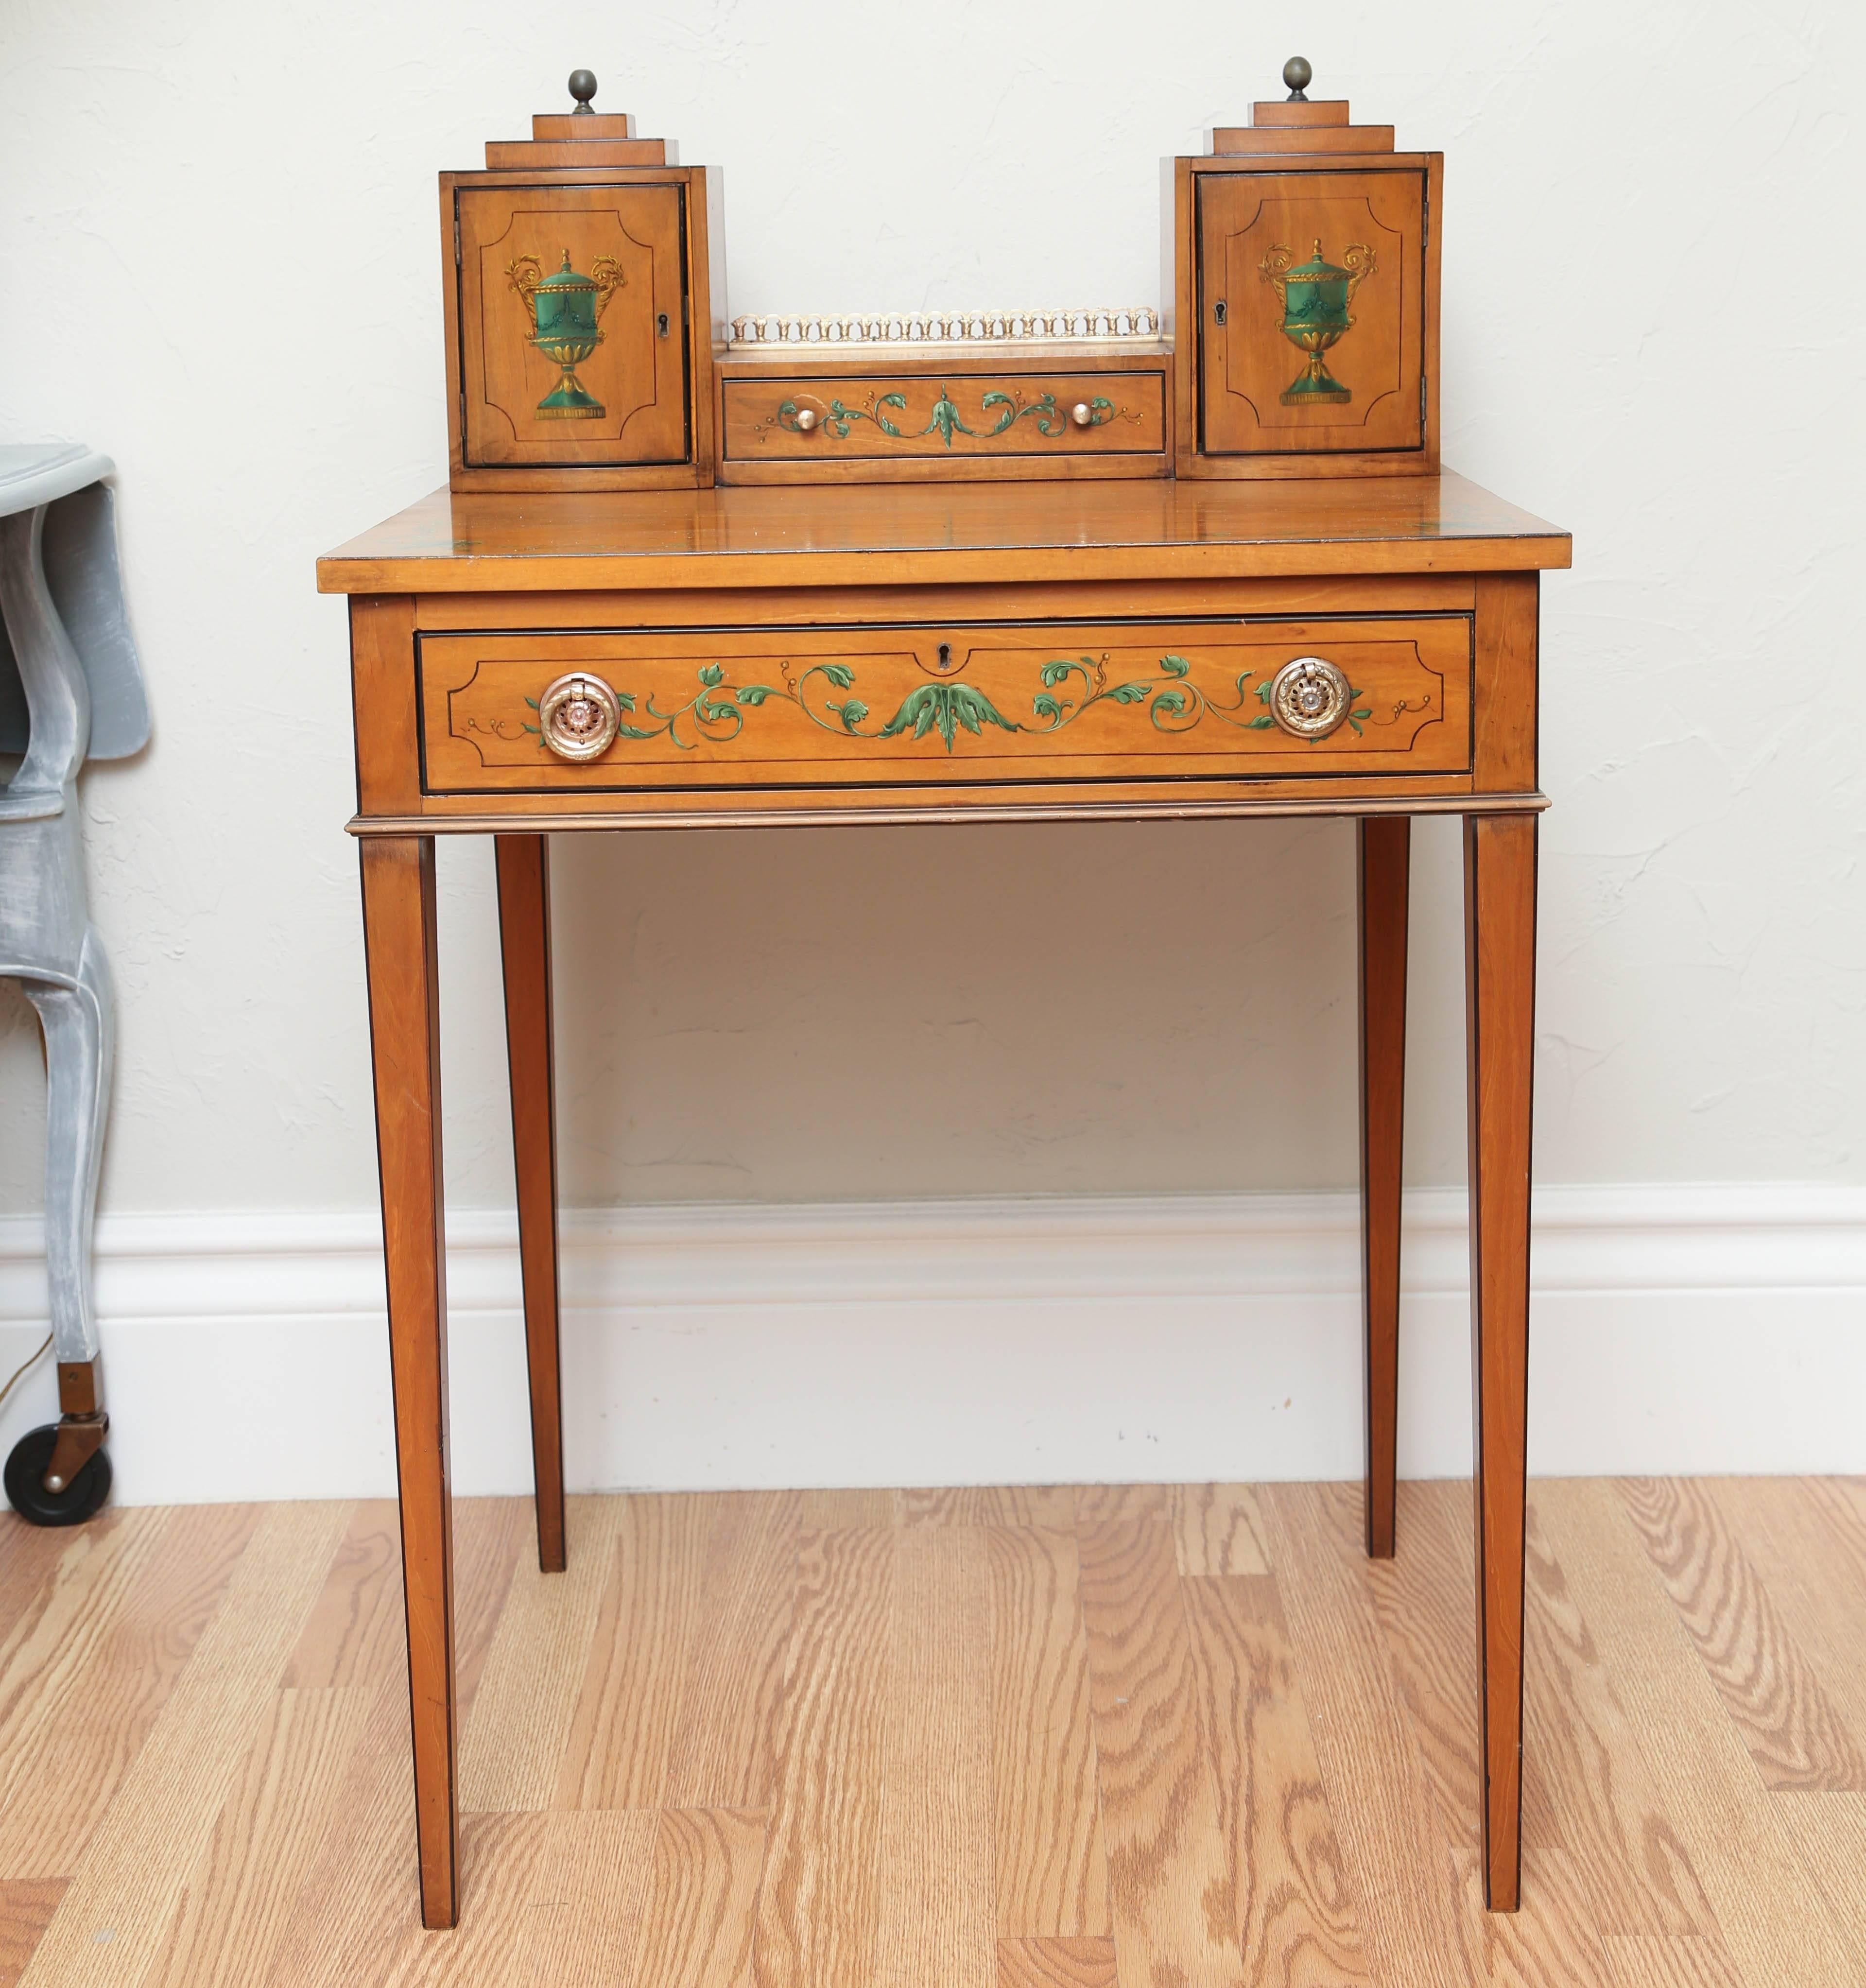 Most charming antique Bonheur Adams style desk with beautiful painted accents and architectural detail.